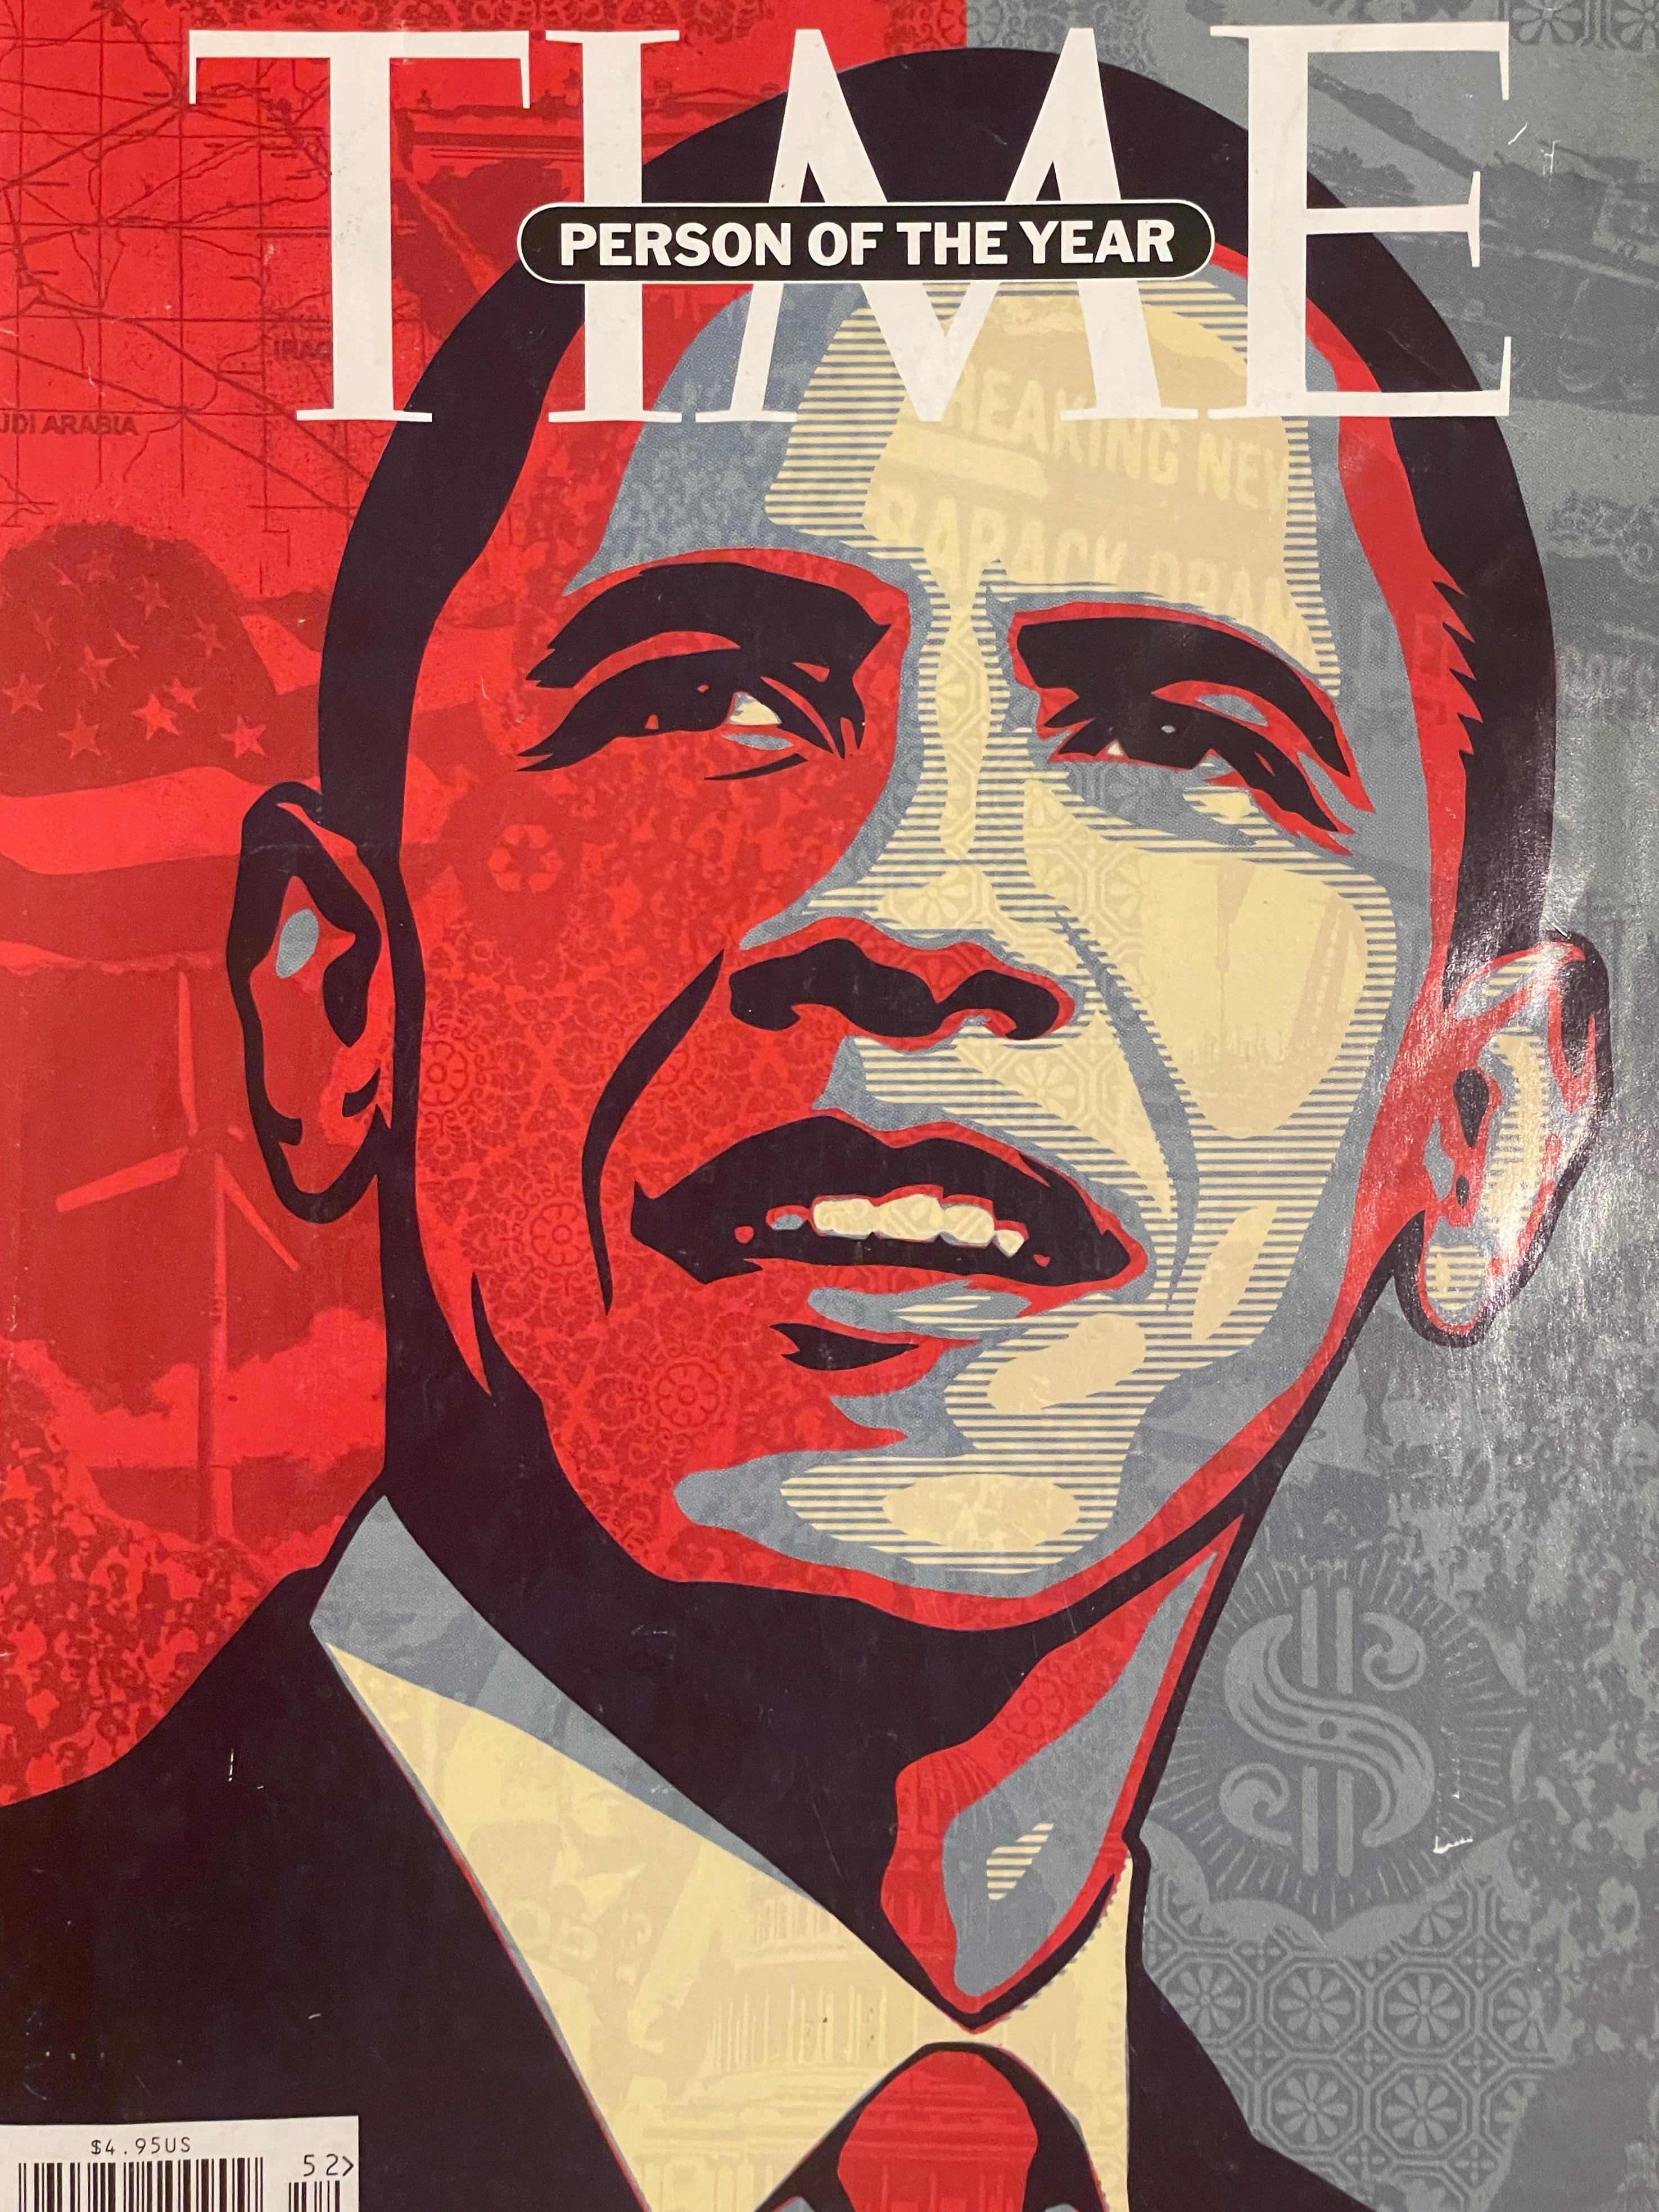 Person Of The Year Barack Obama Time Magazine Cover by Shepard Fairey 2008 1